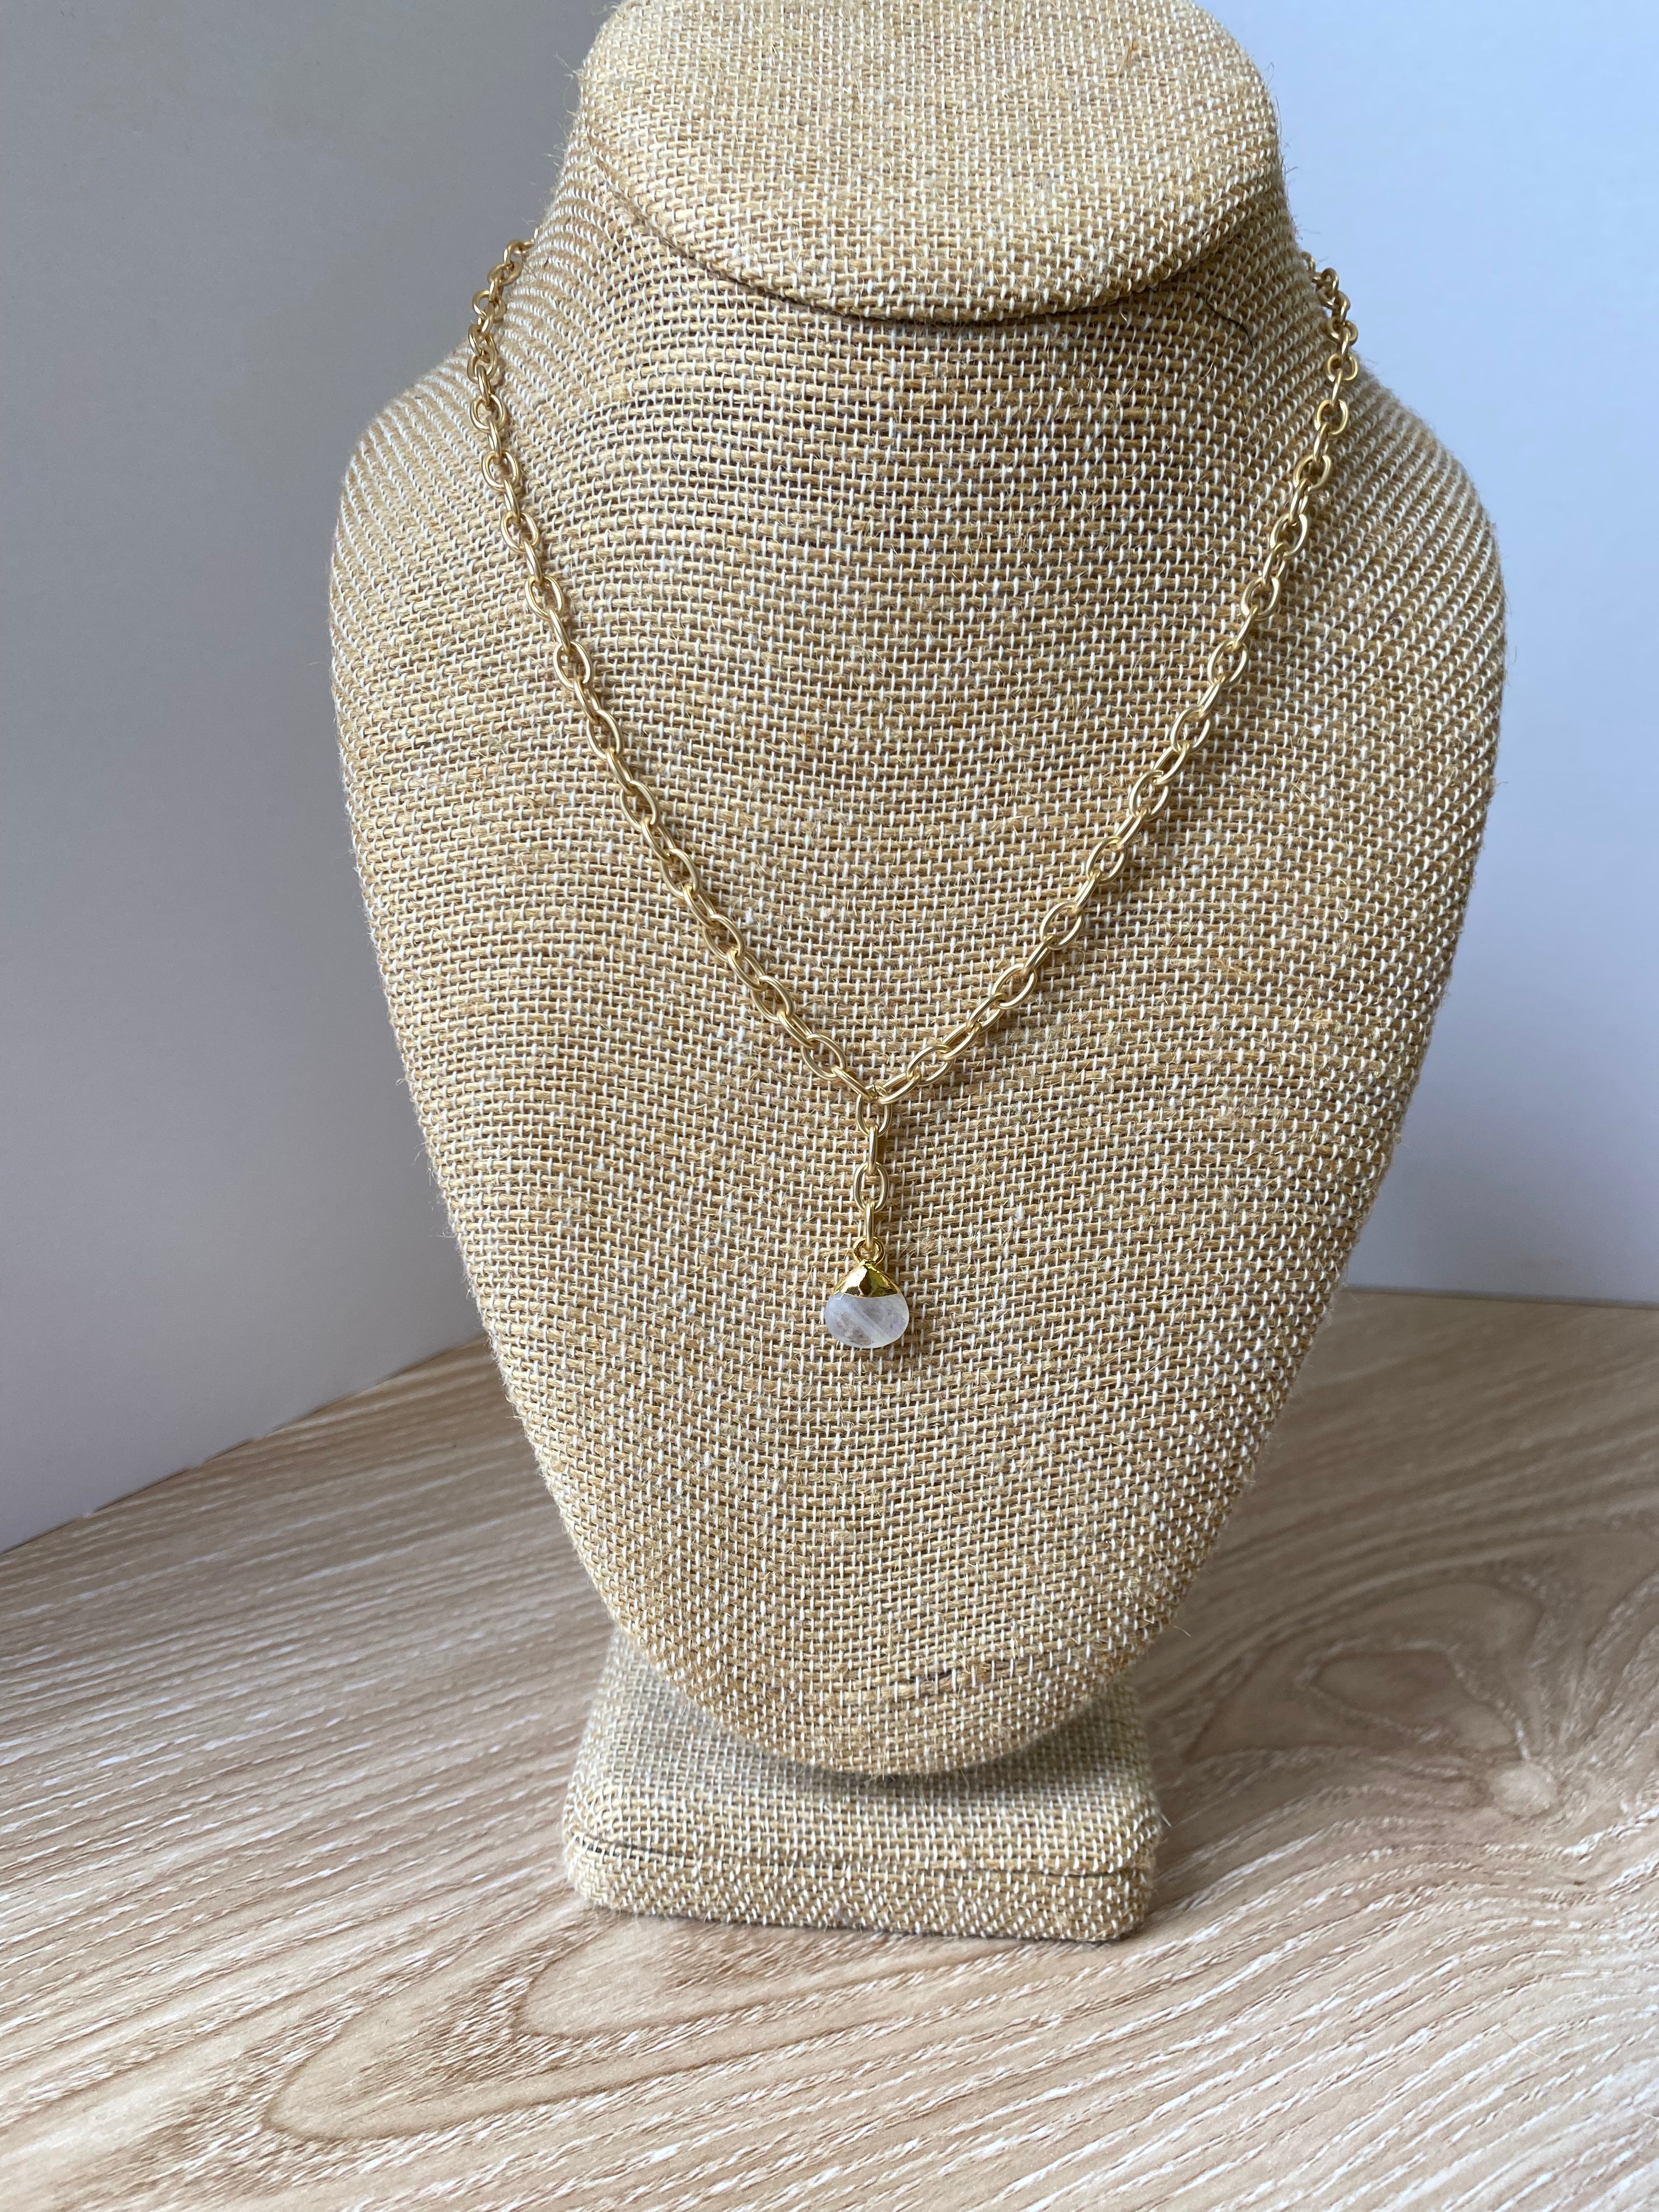 “Mindful” Necklace